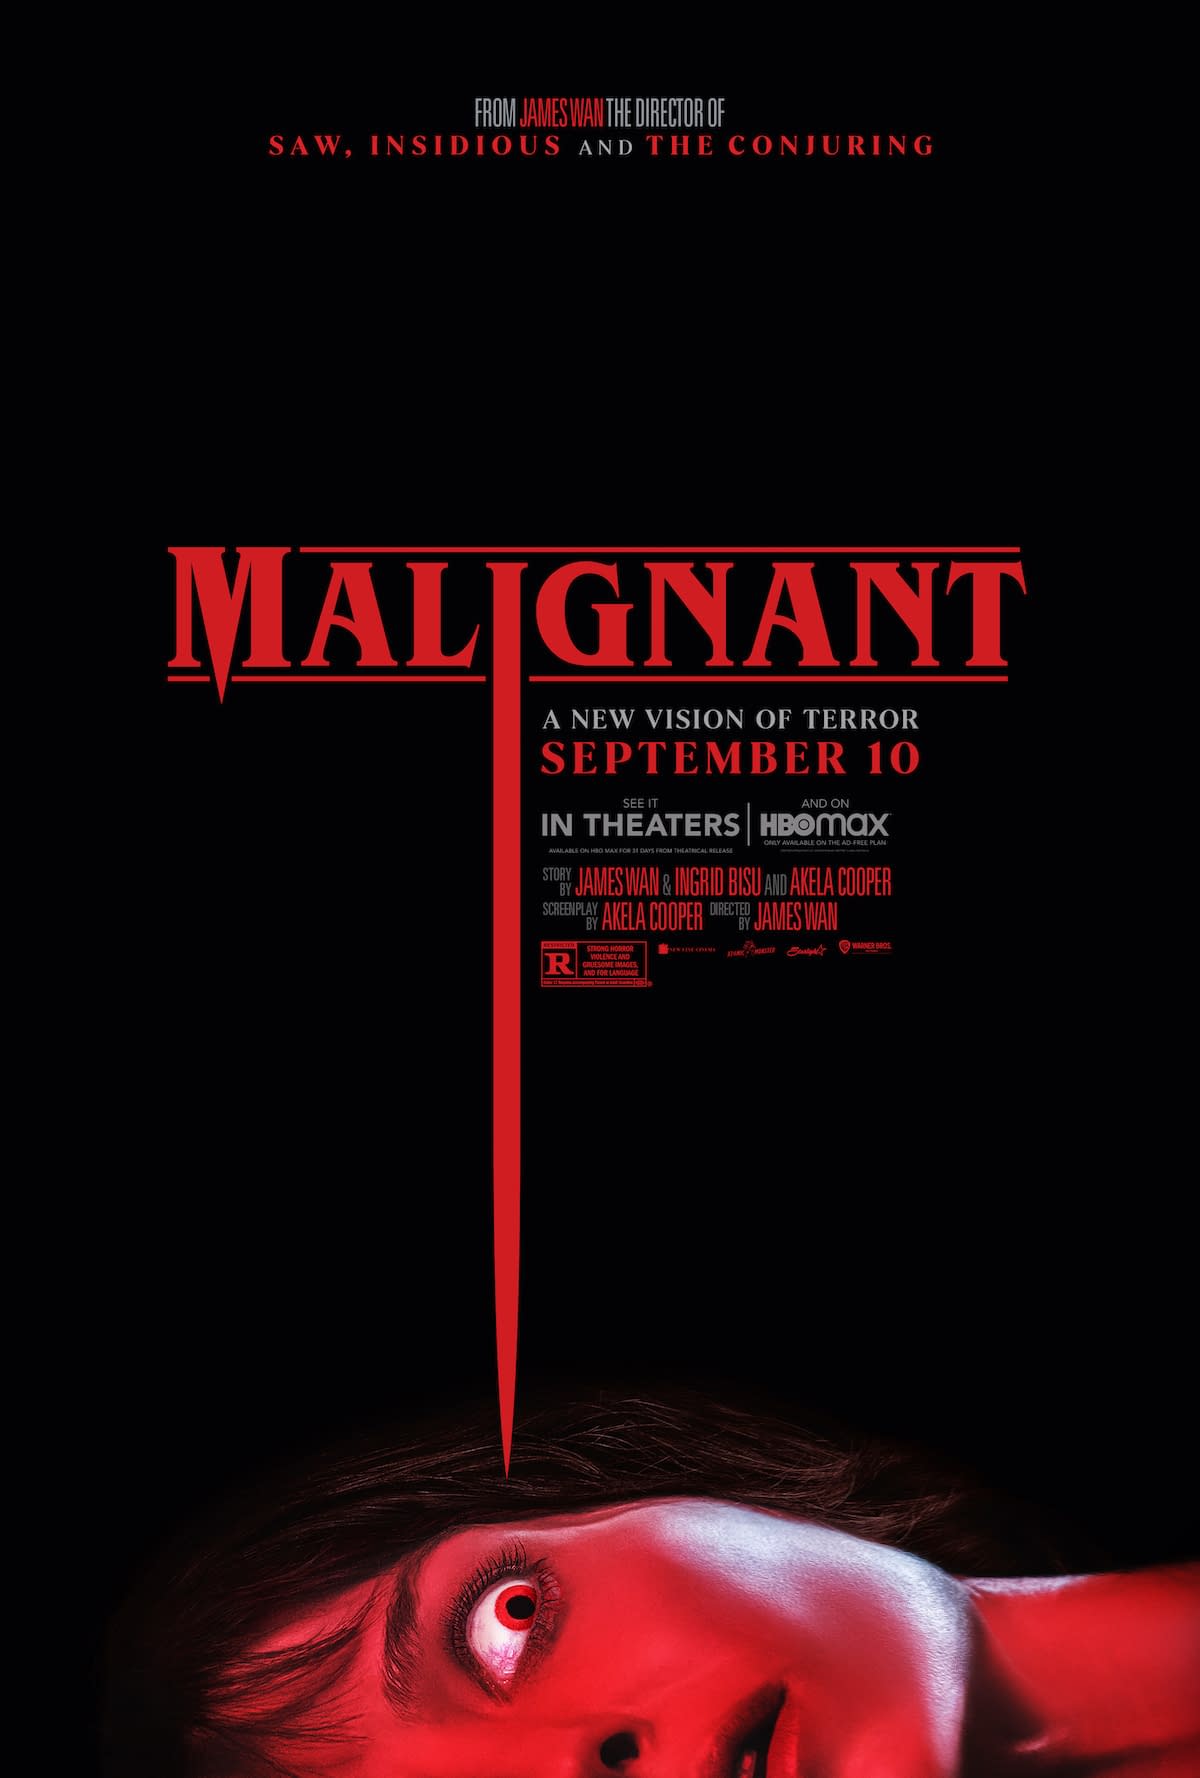 Malignant Trailer Debuts As James Wan Swings For The Fences Sept